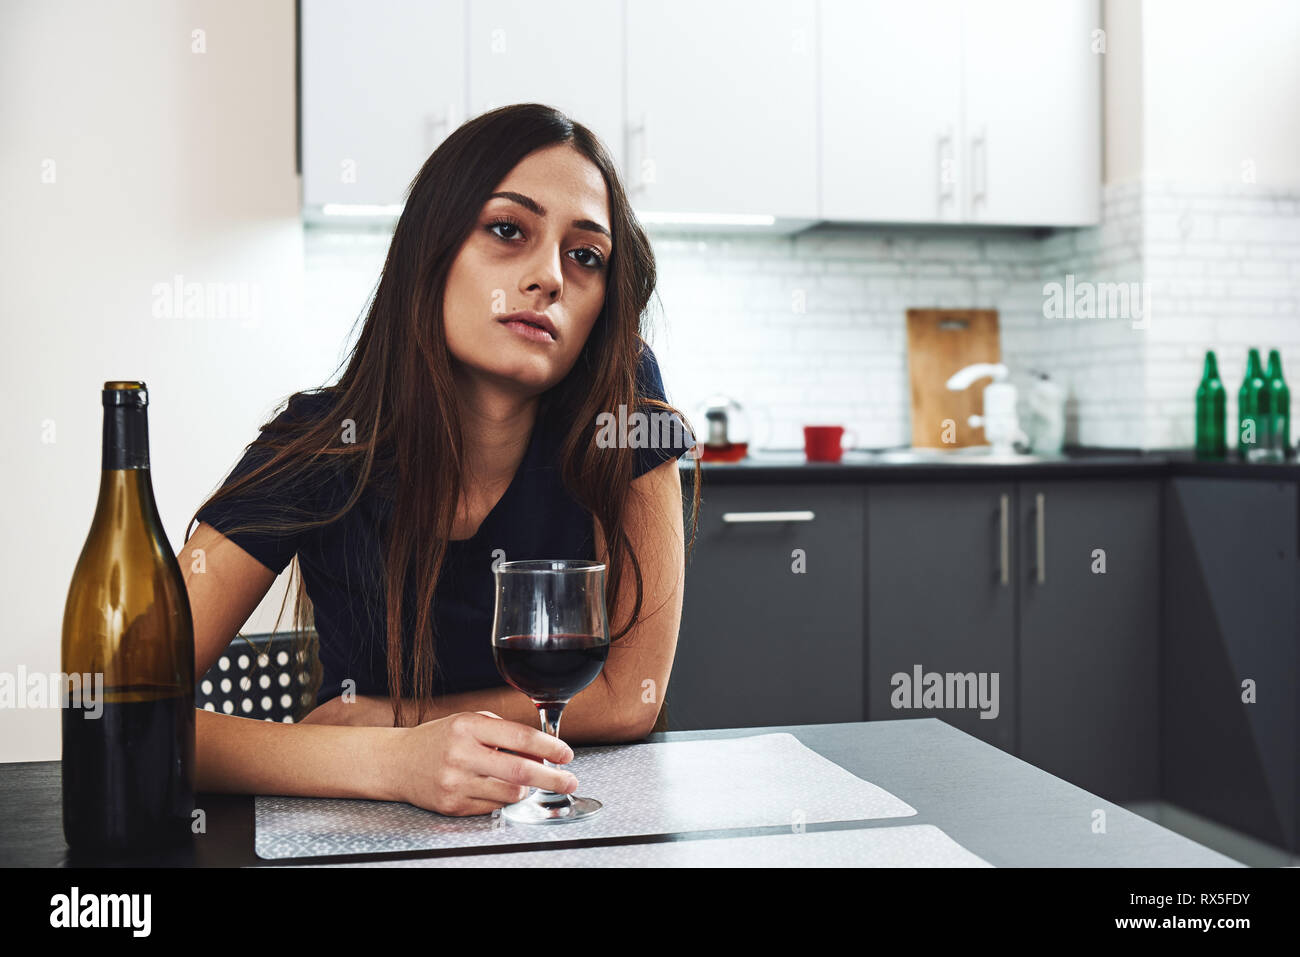 Dark-haired, sad and wasted alcoholic woman sitting at home, in the kitchen, drinking red wine, holding glass, completely drunk, looking depressed, lo Stock Photo